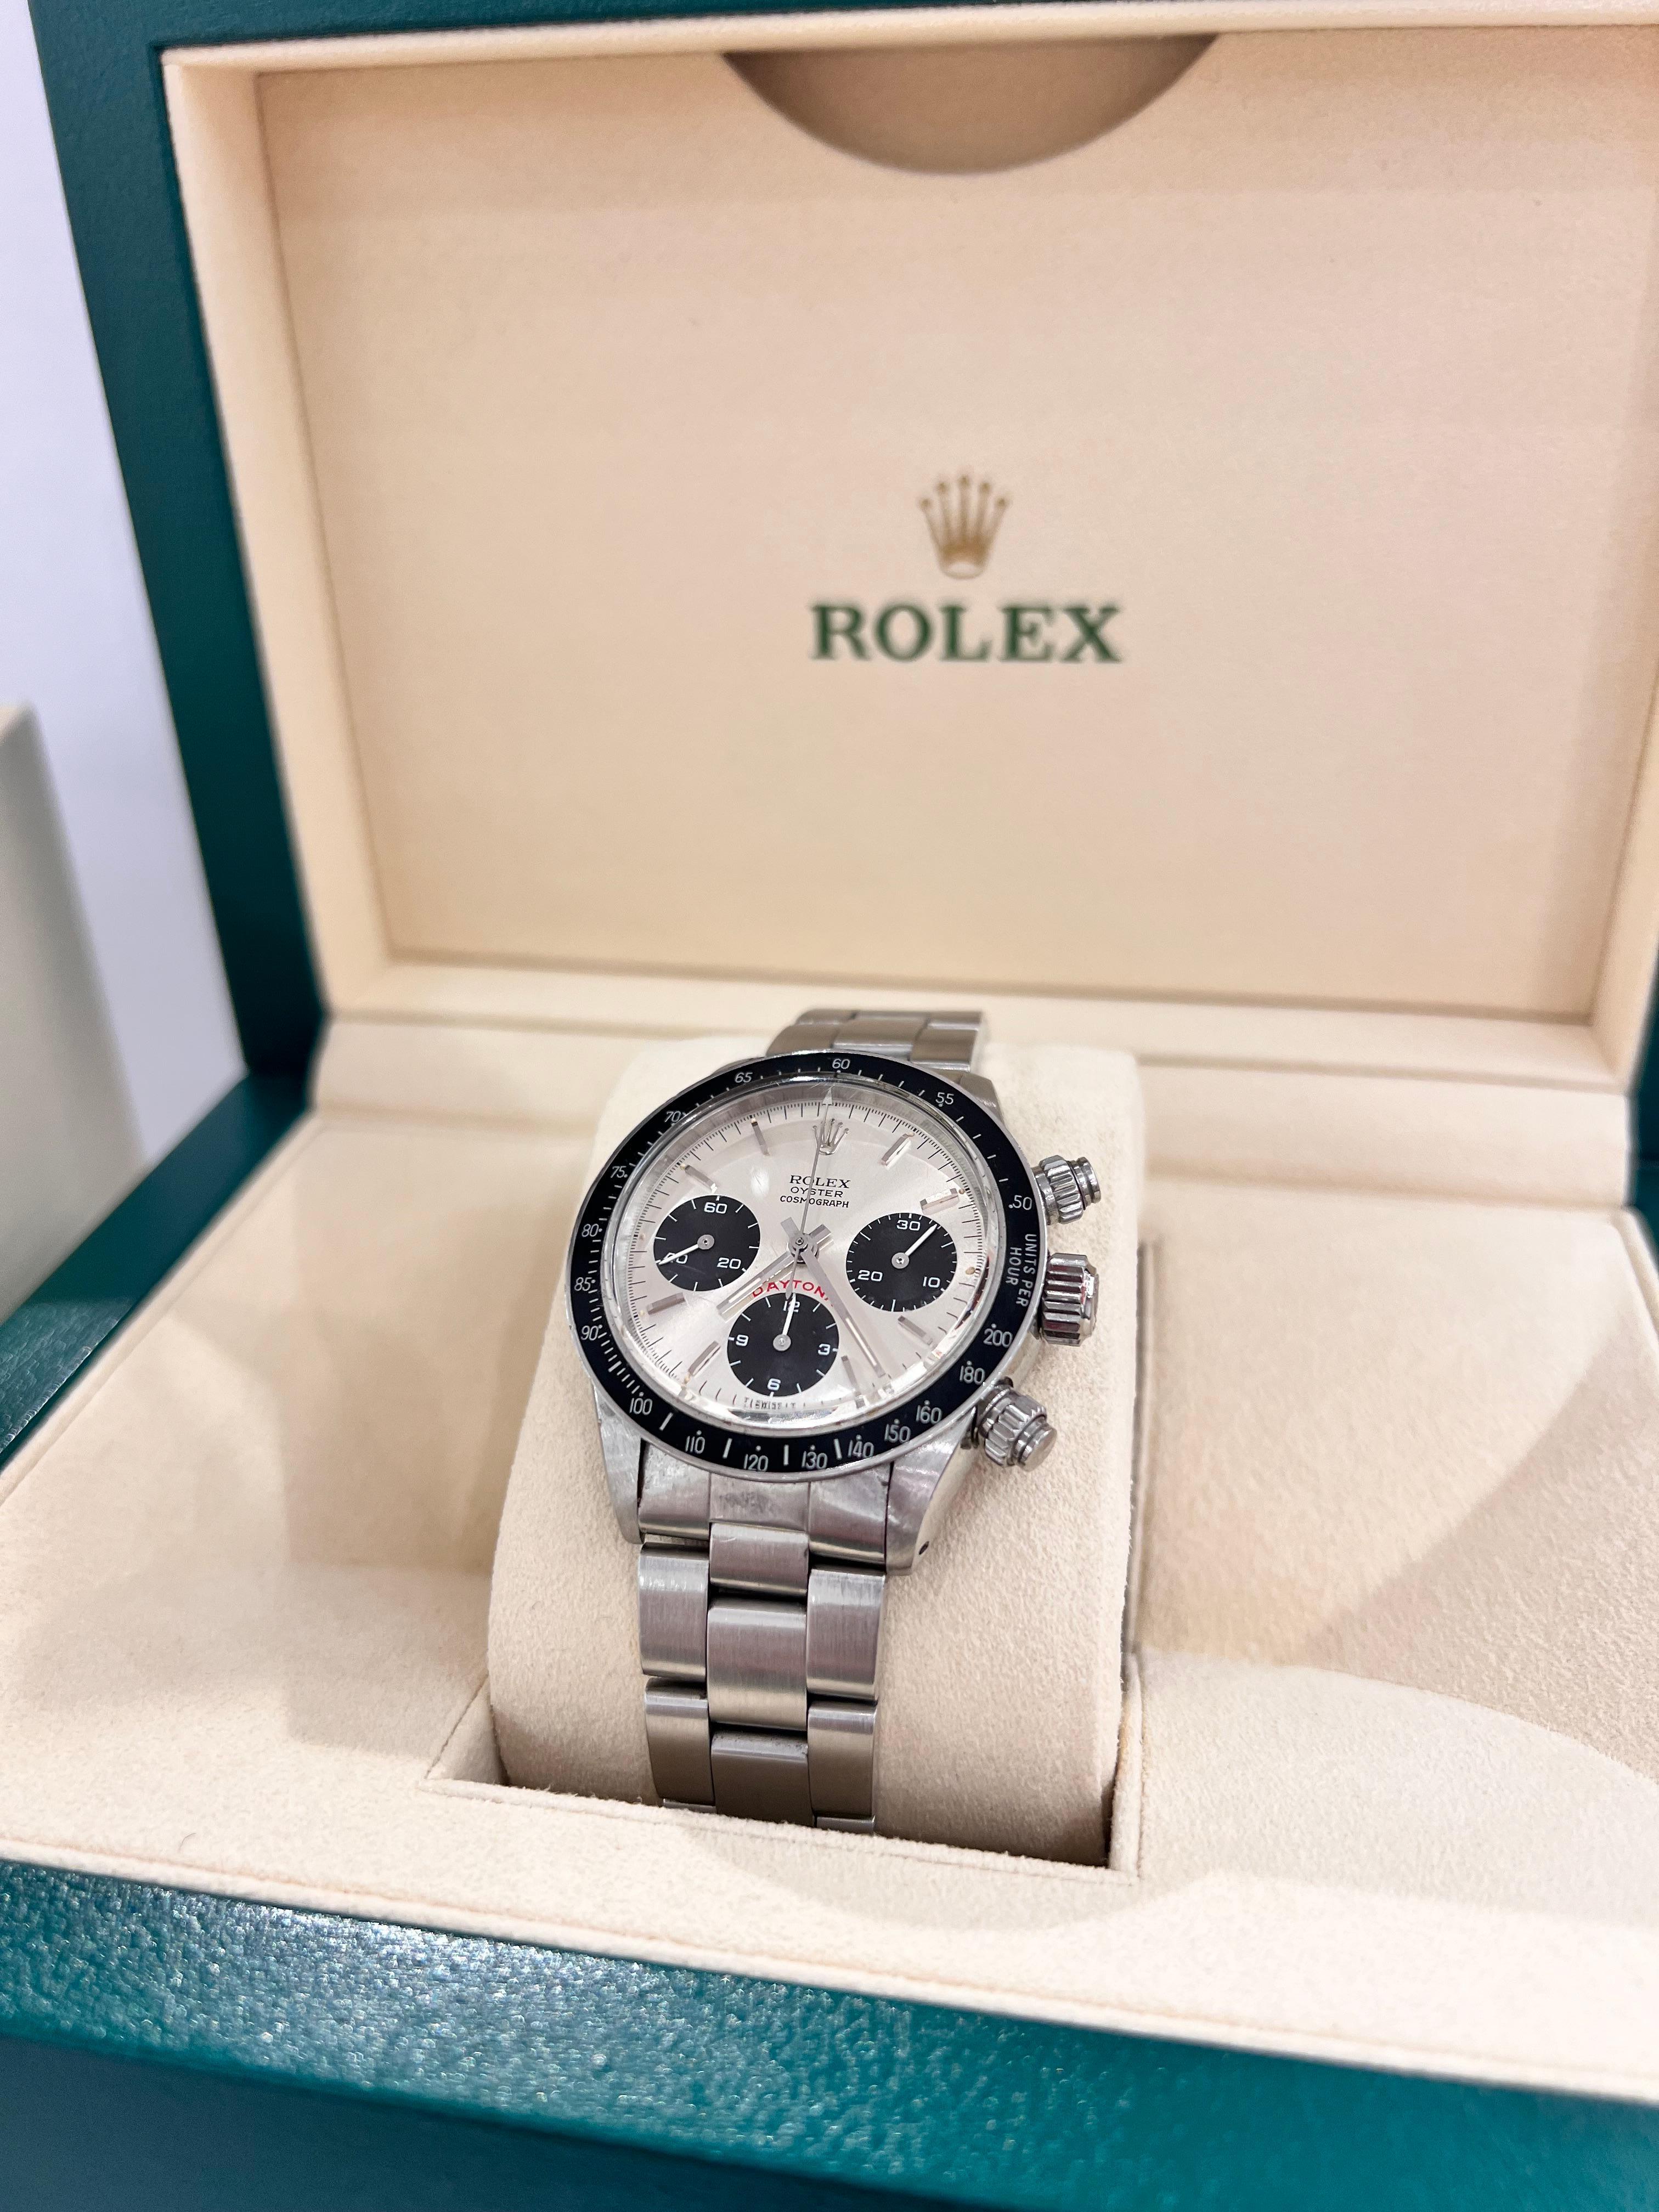 First launched in 1963 and created specifically for the world of automotive racing, the Rolex Daytona collection is arguably one of the most popular and universally respected lines of timepieces from the brand’s entire catalog. And among the